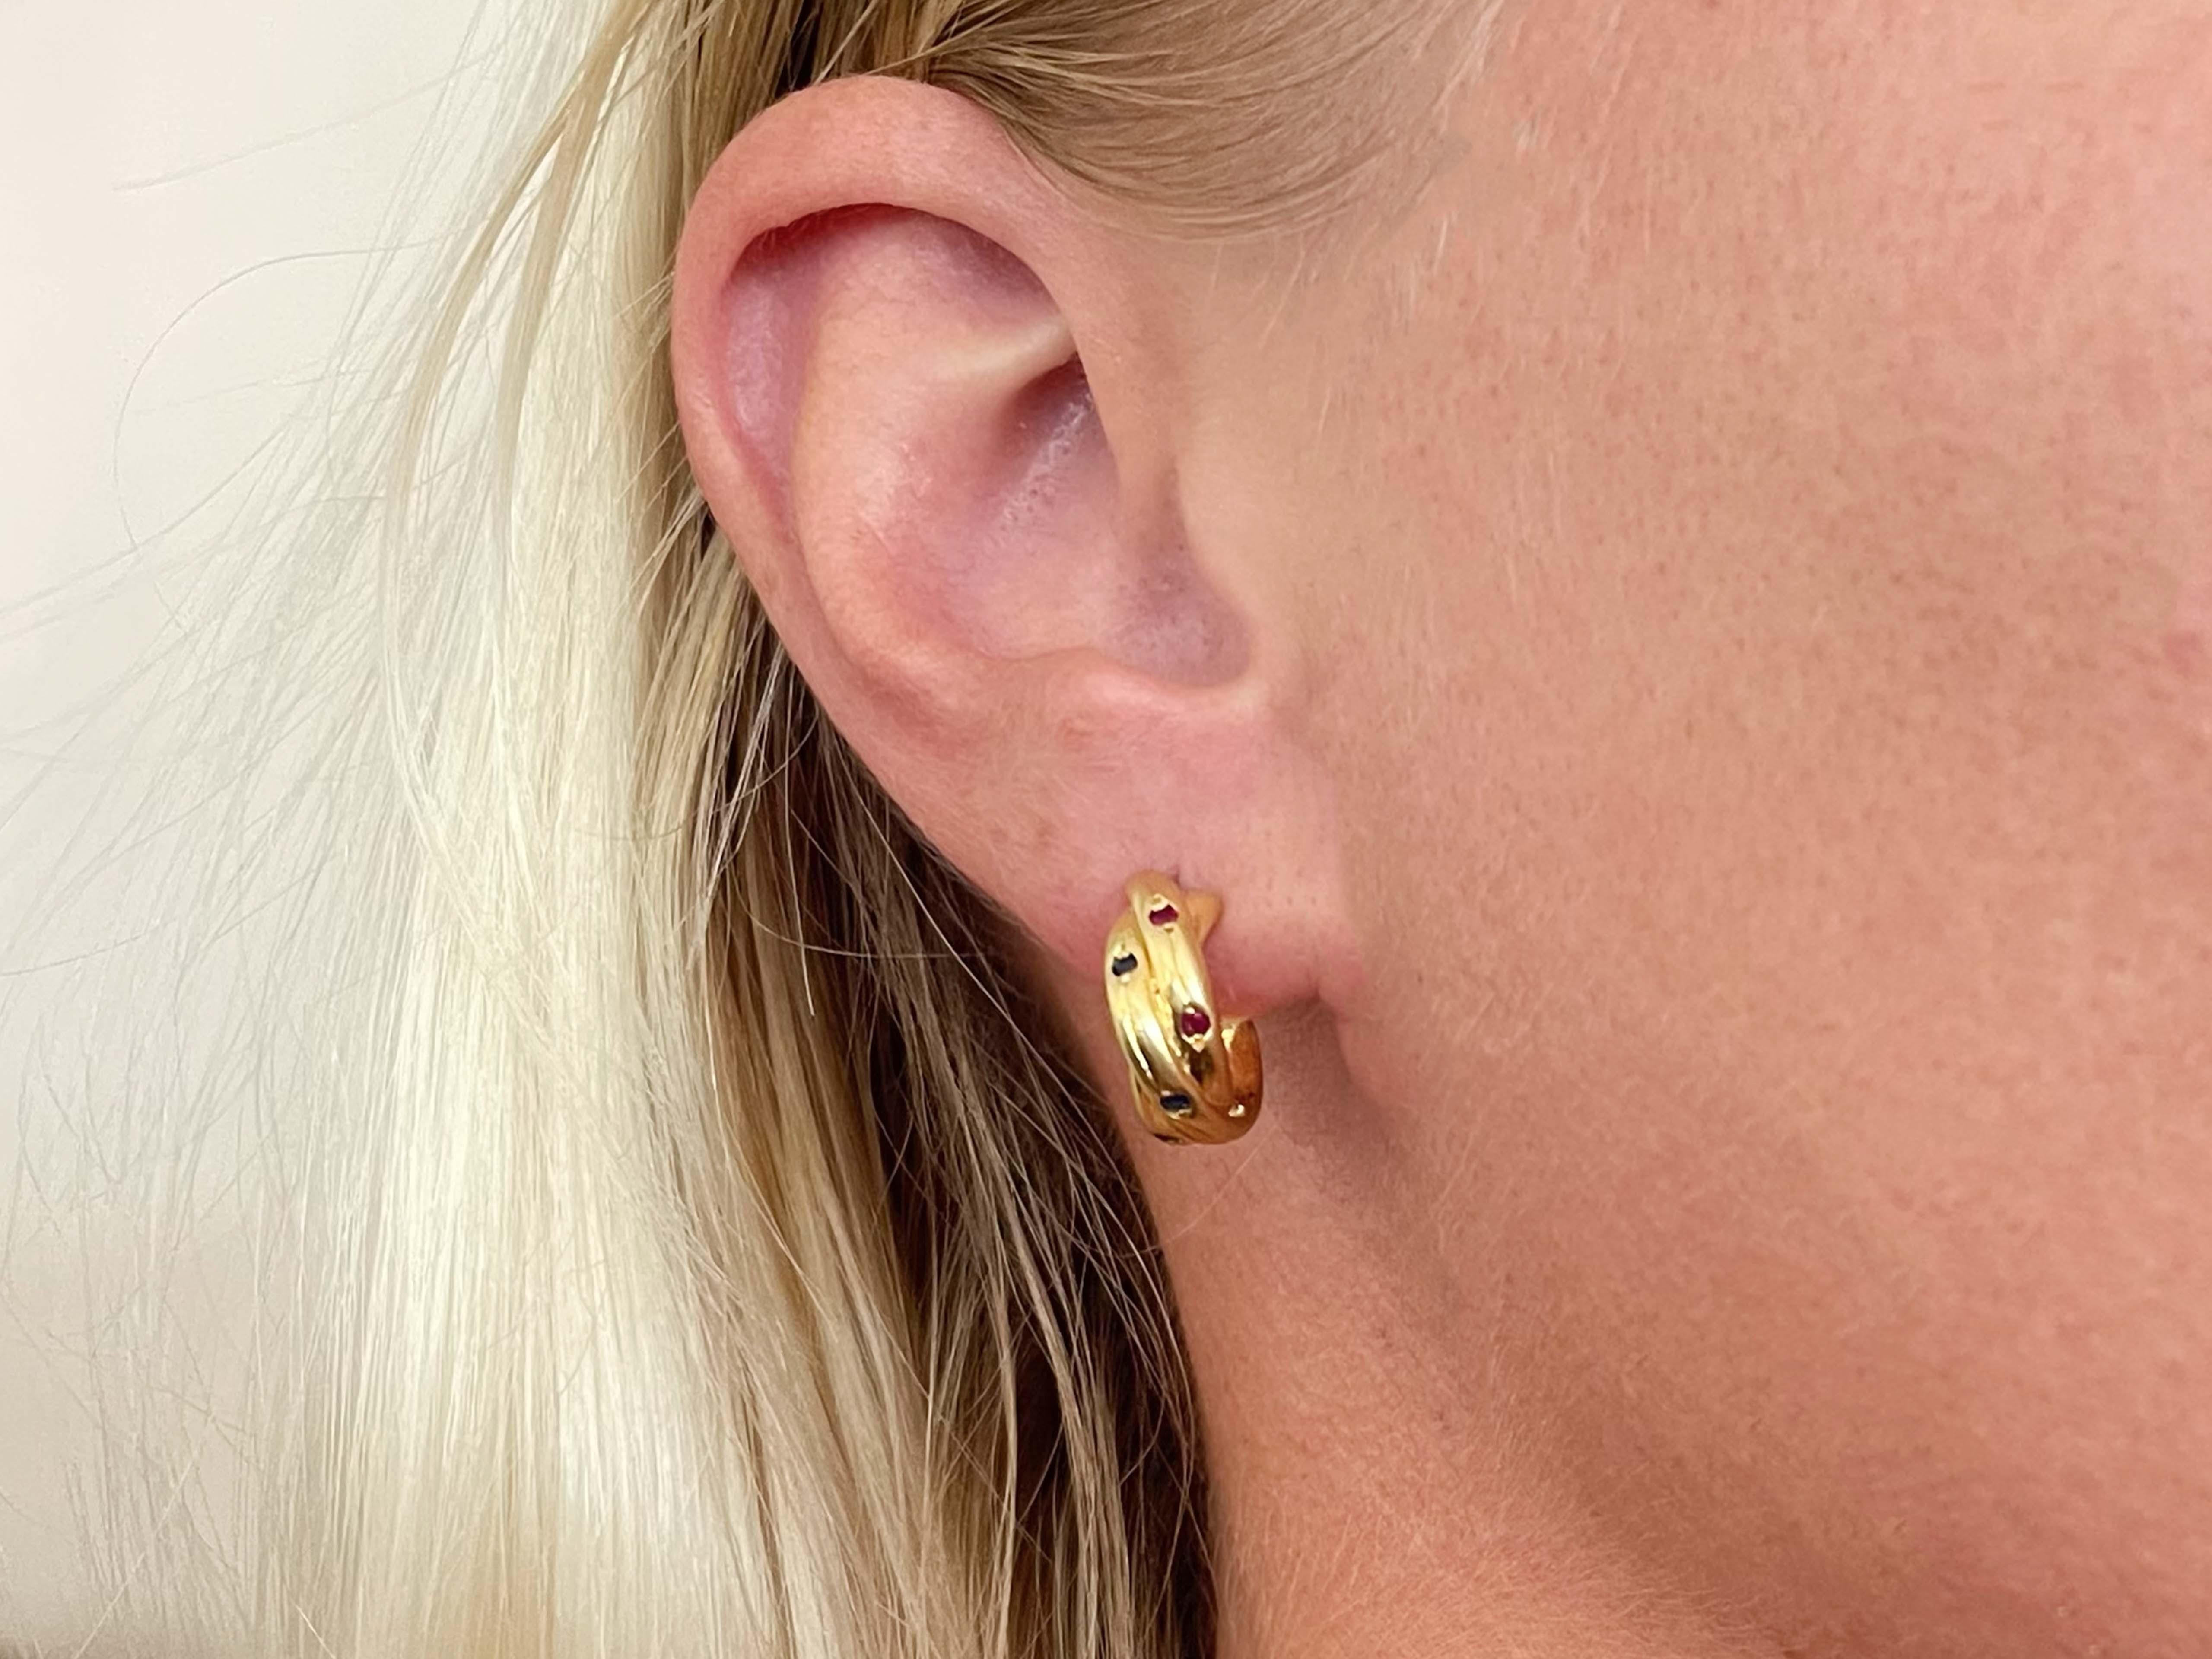 Earrings Specifications:

Metal: 18k Yellow Gold

Earring Diameter: 15.3 mm

Total Weight: 7.4 Grams

Setting: Bezel

Gemstones: 0.04 carats of rubies, 0.06 carats of sapphires and 0.04 carats of emeralds

Stamped: 